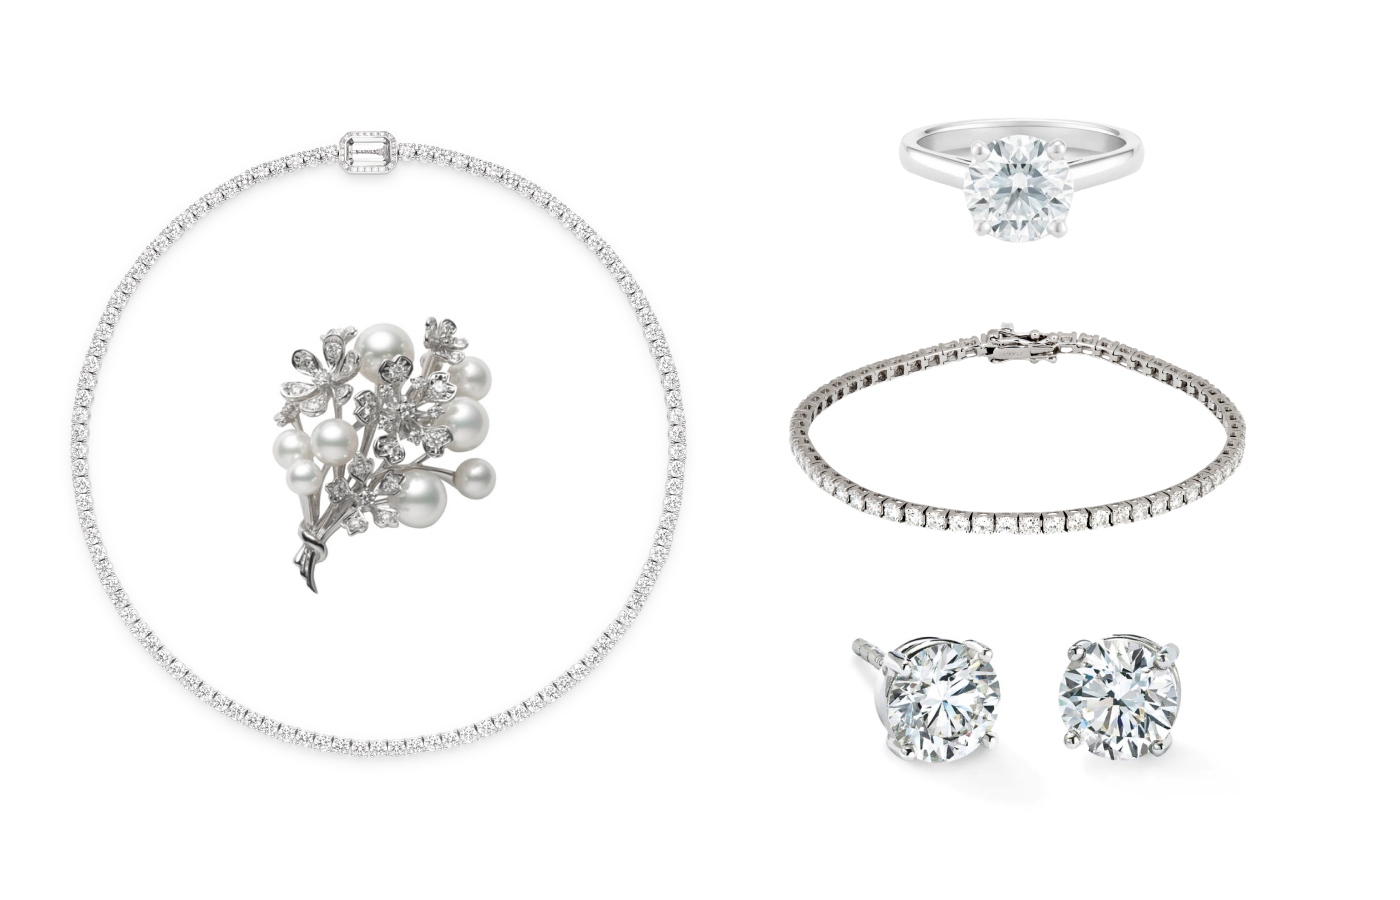 Examples of classically beautiful yet traditional jewels, including the Boucheron Vendôme Riviere necklace, a diamond tennis bracelet by Roxanne First, round-brilliant-cut diamond stud earrings by Boodles, a pearl and diamond brooch by Mikimoto, and a diamond solitaire ring by De Beers